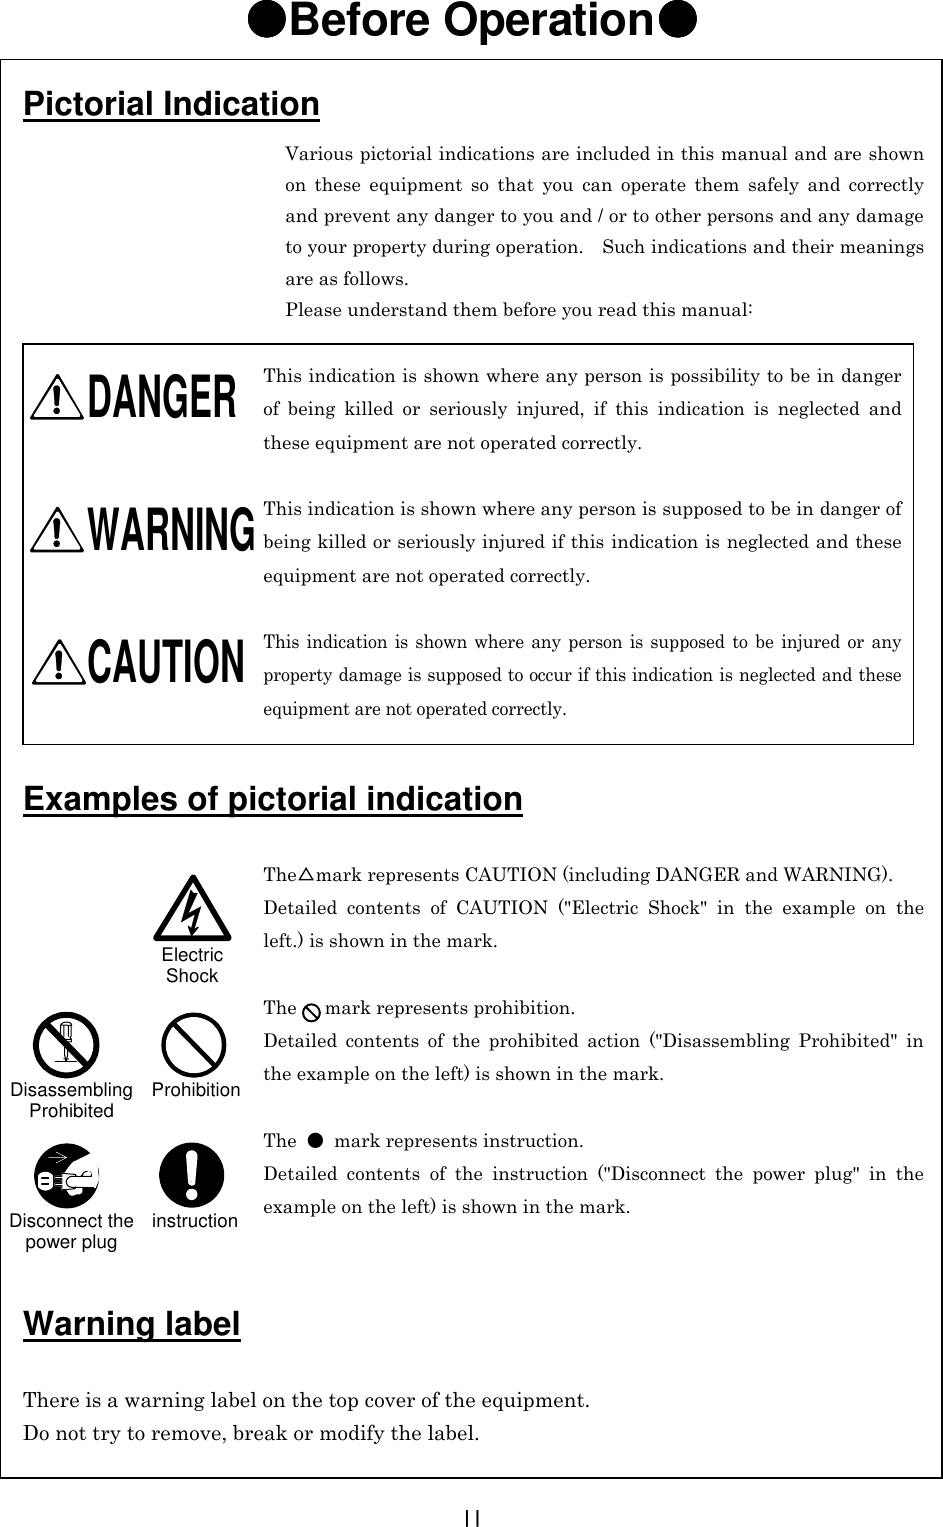  II ●●●●Before Operation●●●●                                             Various pictorial indications are included in this manual and are shown on these equipment so that you can operate them safely and correctly and prevent any danger to you and / or to other persons and any damage to your property during operation.    Such indications and their meanings are as follows. Please understand them before you read this manual:  This indication is shown where any person is possibility to be in danger of being killed or seriously injured, if this indication is neglected and these equipment are not operated correctly.  This indication is shown where any person is supposed to be in danger of being killed or seriously injured if this indication is neglected and these equipment are not operated correctly.  This indication is shown where any person is supposed to be injured or any property damage is supposed to occur if this indication is neglected and these equipment are not operated correctly.     The△mark represents CAUTION (including DANGER and WARNING). Detailed contents of CAUTION (&quot;Electric Shock&quot; in the example on the left.) is shown in the mark.  The   mark represents prohibition. Detailed contents of the prohibited action (&quot;Disassembling Prohibited&quot; in the example on the left) is shown in the mark.  The  ●  mark represents instruction. Detailed contents of the instruction (&quot;Disconnect the power plug&quot; in the example on the left) is shown in the mark. Pictorial Indication WARNING CAUTION Examples of pictorial indication Warning label  There is a warning label on the top cover of the equipment. Do not try to remove, break or modify the label. Electric Shock Disassembling Prohibited Prohibition Disconnect the power plug instruction DANGER  